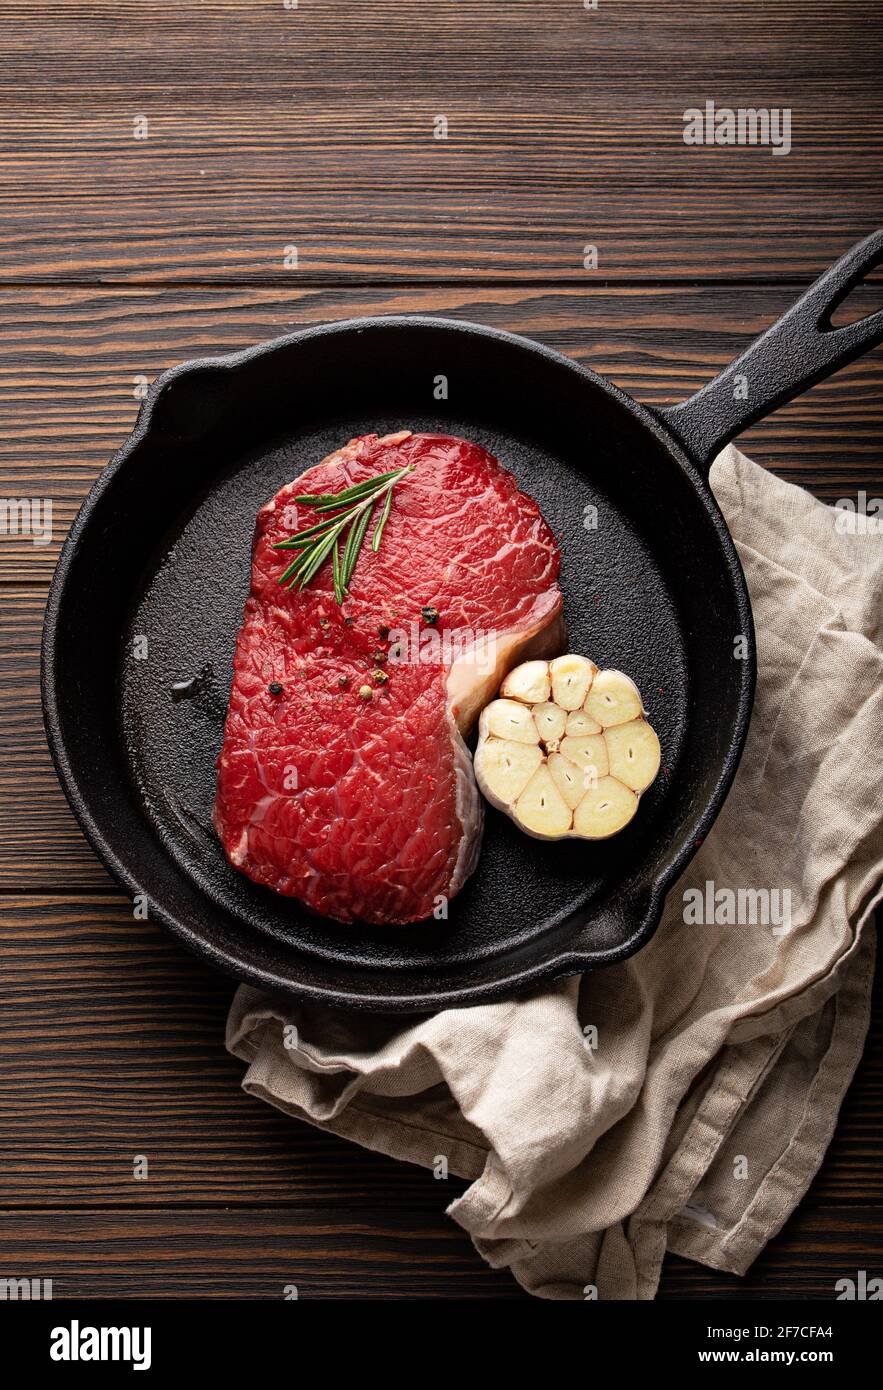 Raw beef steak on frying pan from above Stock Photo